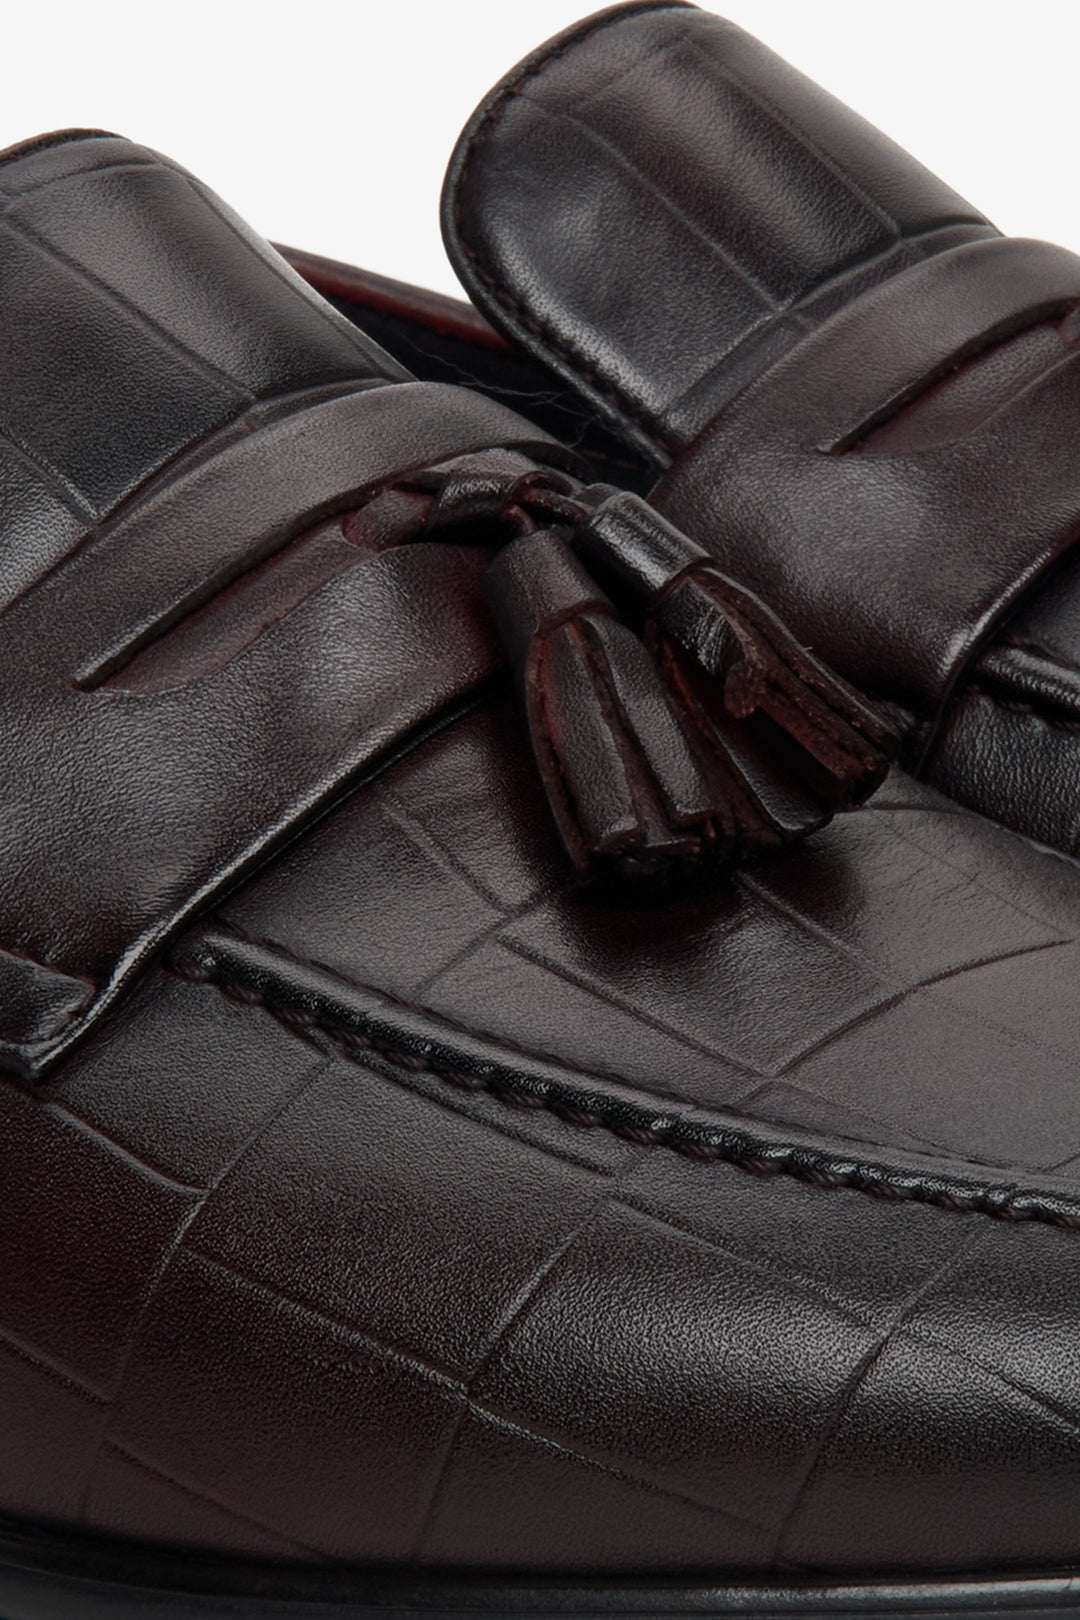 Men's brown leather loafers - close-up of the texture of the material and embellishments.